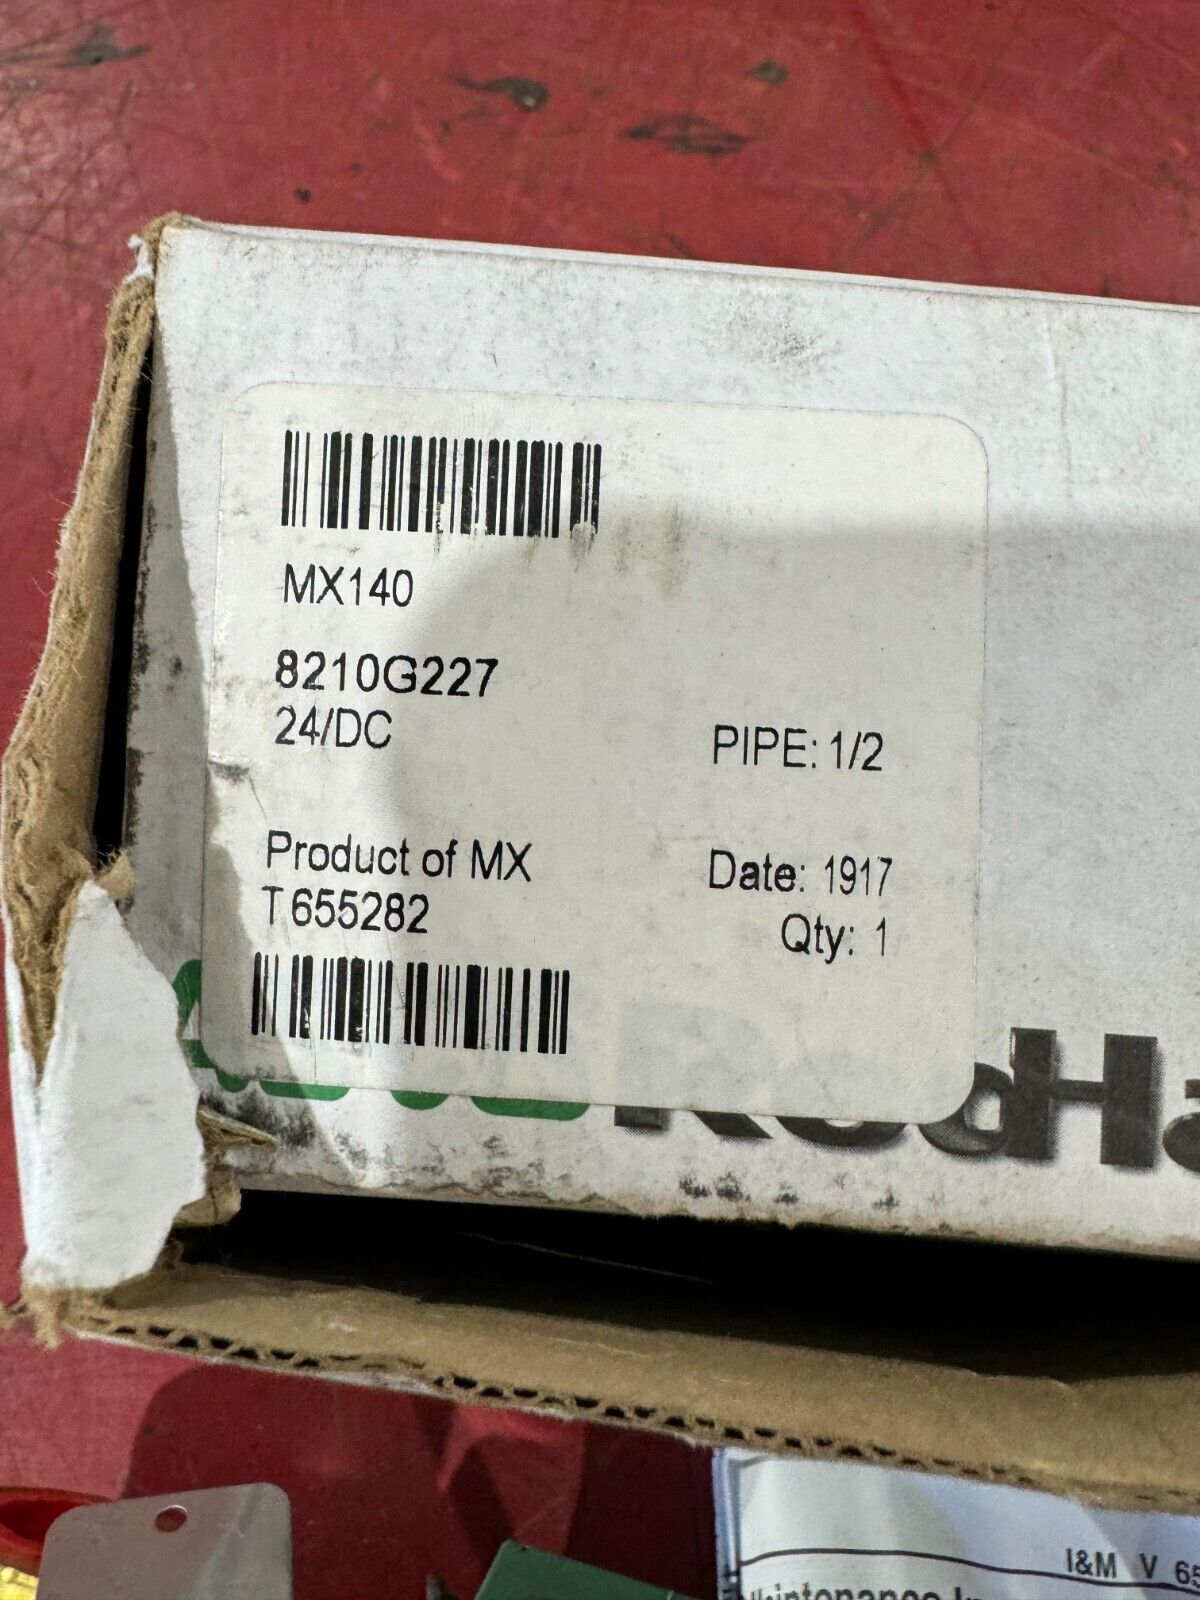 NEW IN BOX ASCO RED HAT SOLENOID VALVE 24/DC. COIL 1/2" PIPE 8210G227